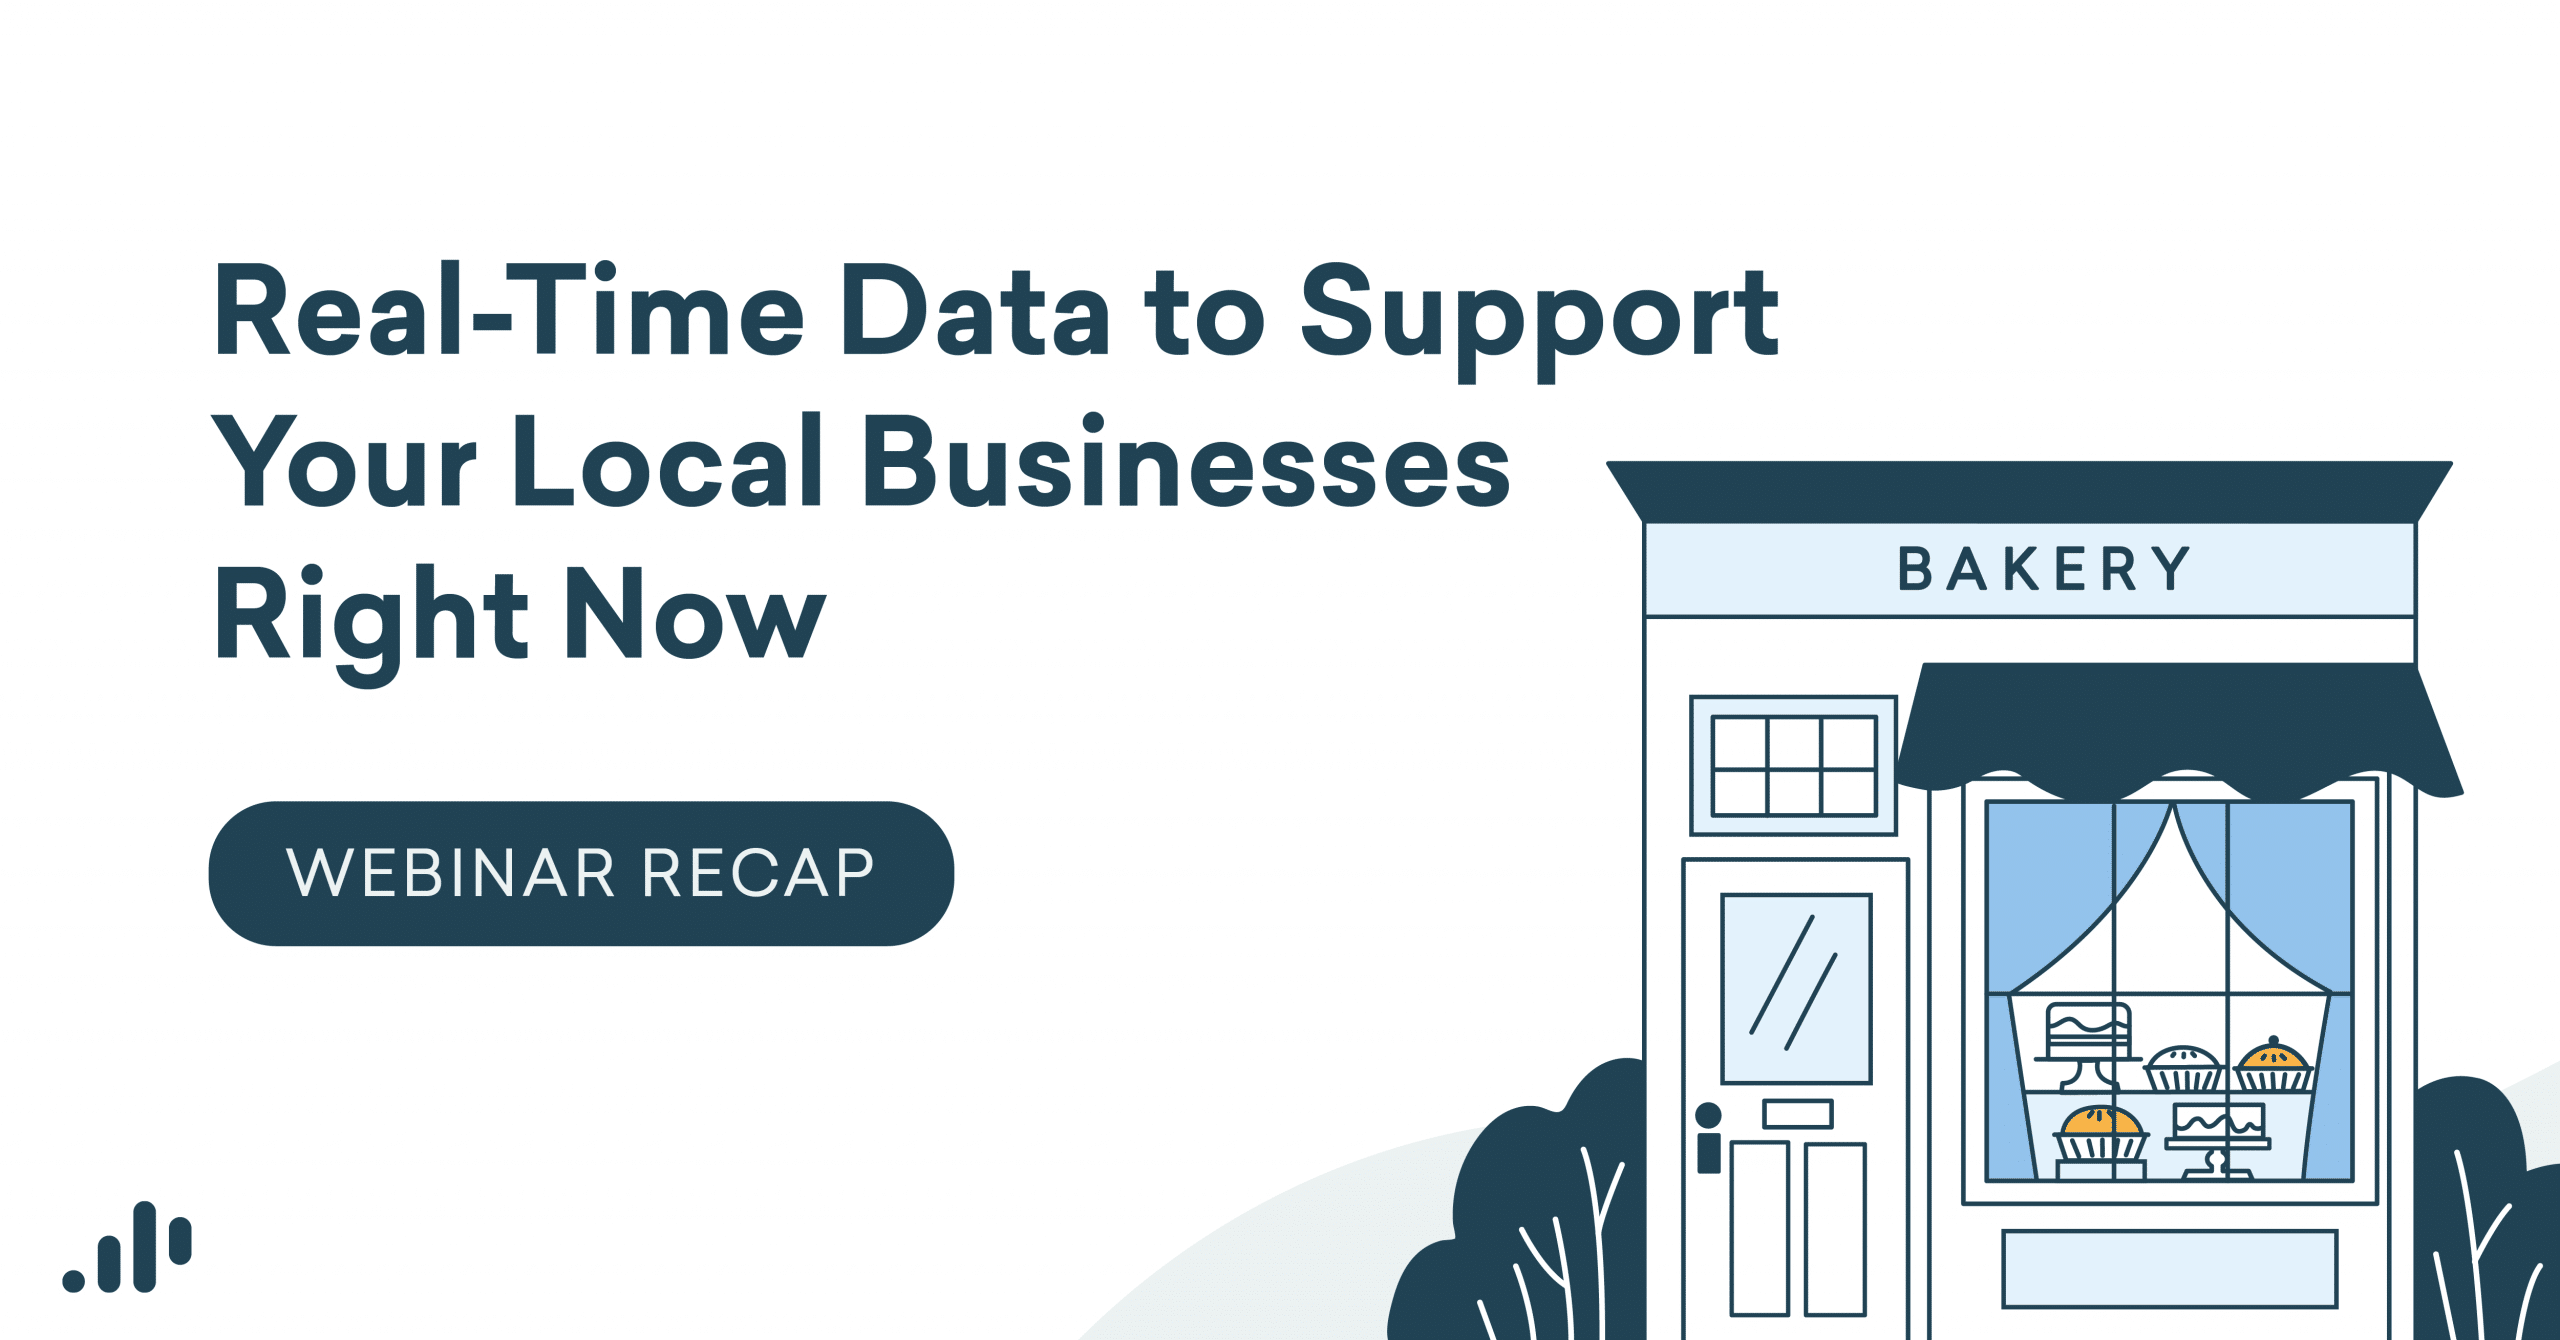 Webinar Recap: Real-Time Data to Support Your Local Businesses Right Now